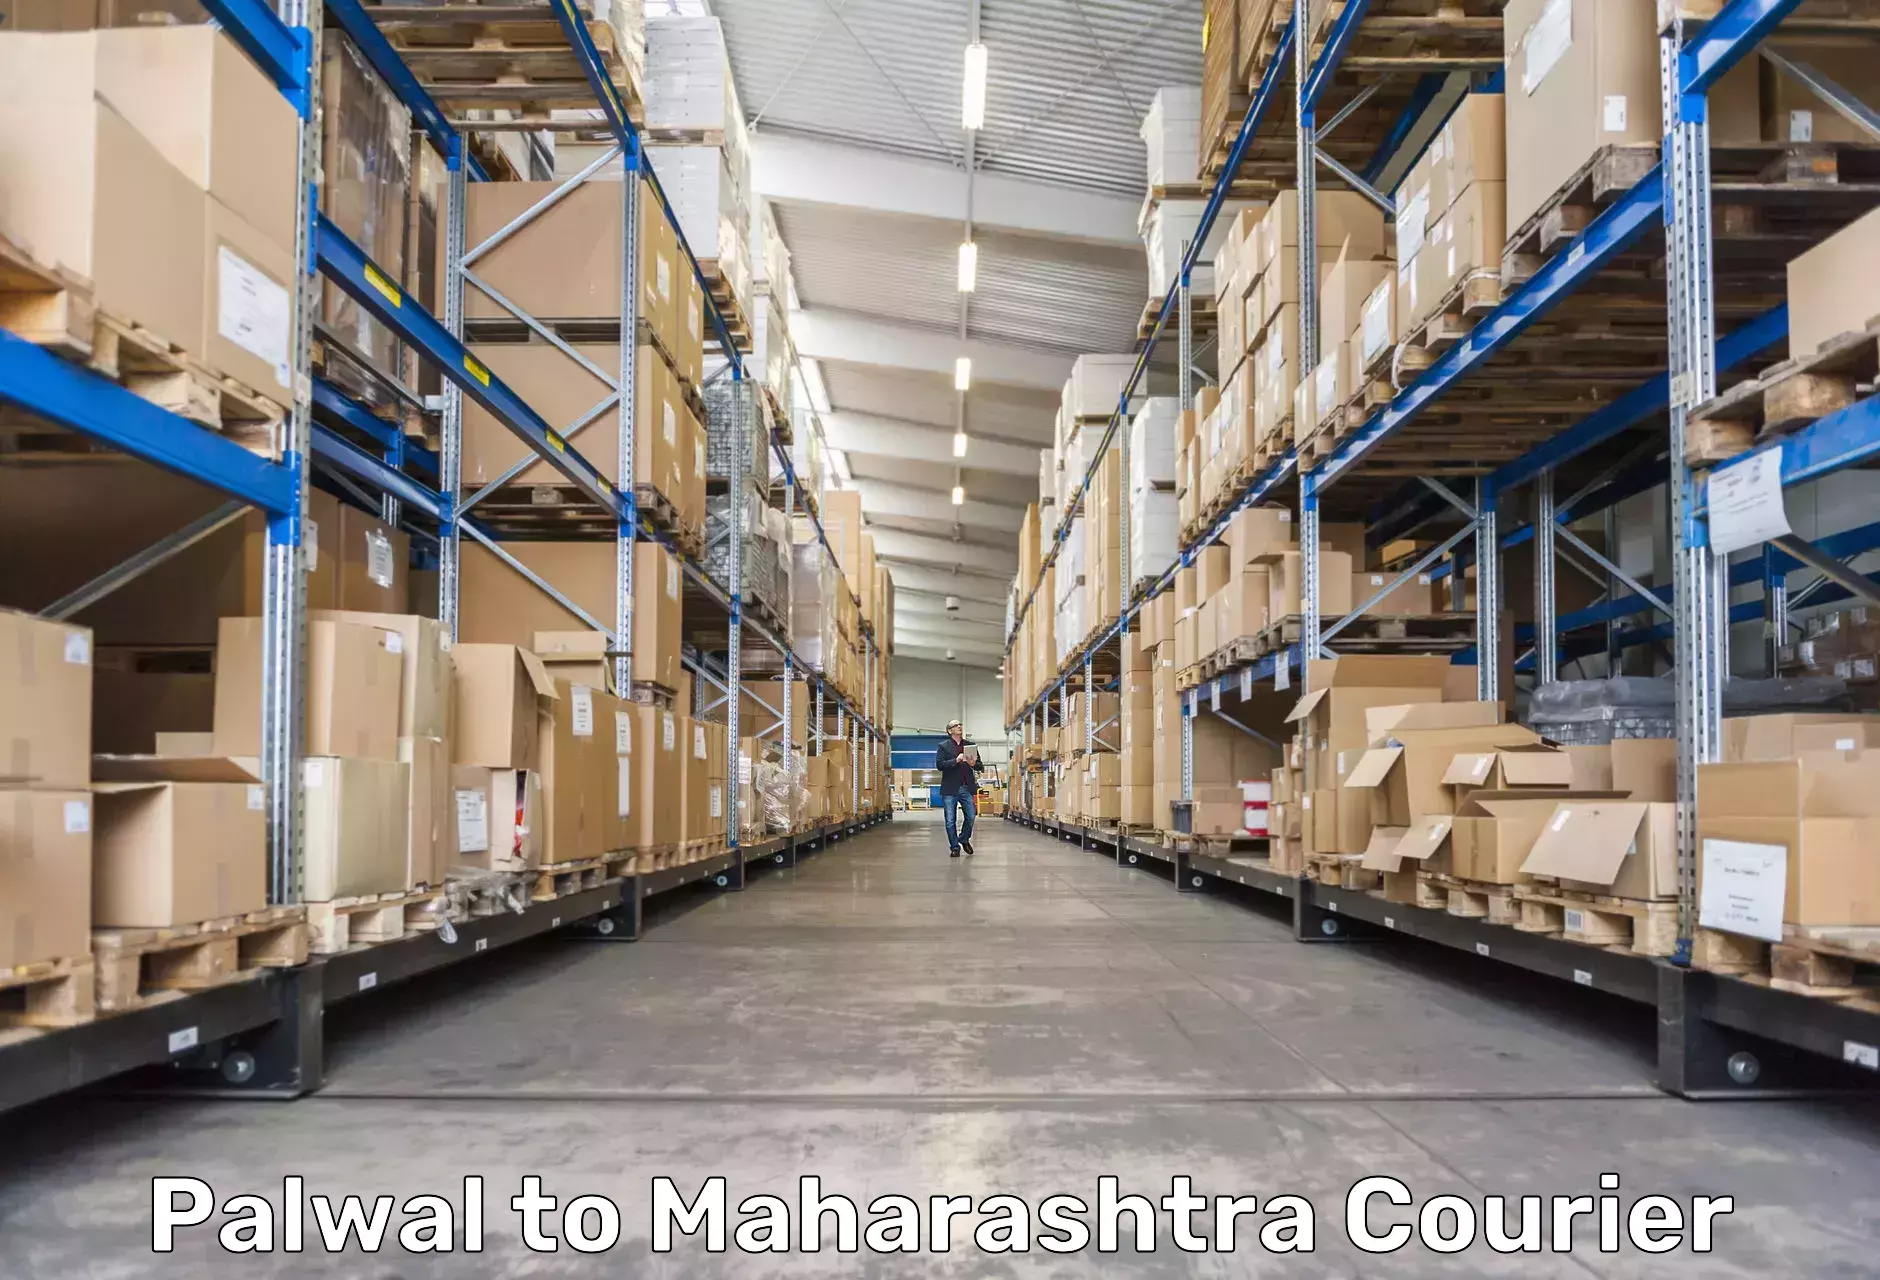 Pharmaceutical courier Palwal to Pen Raigad